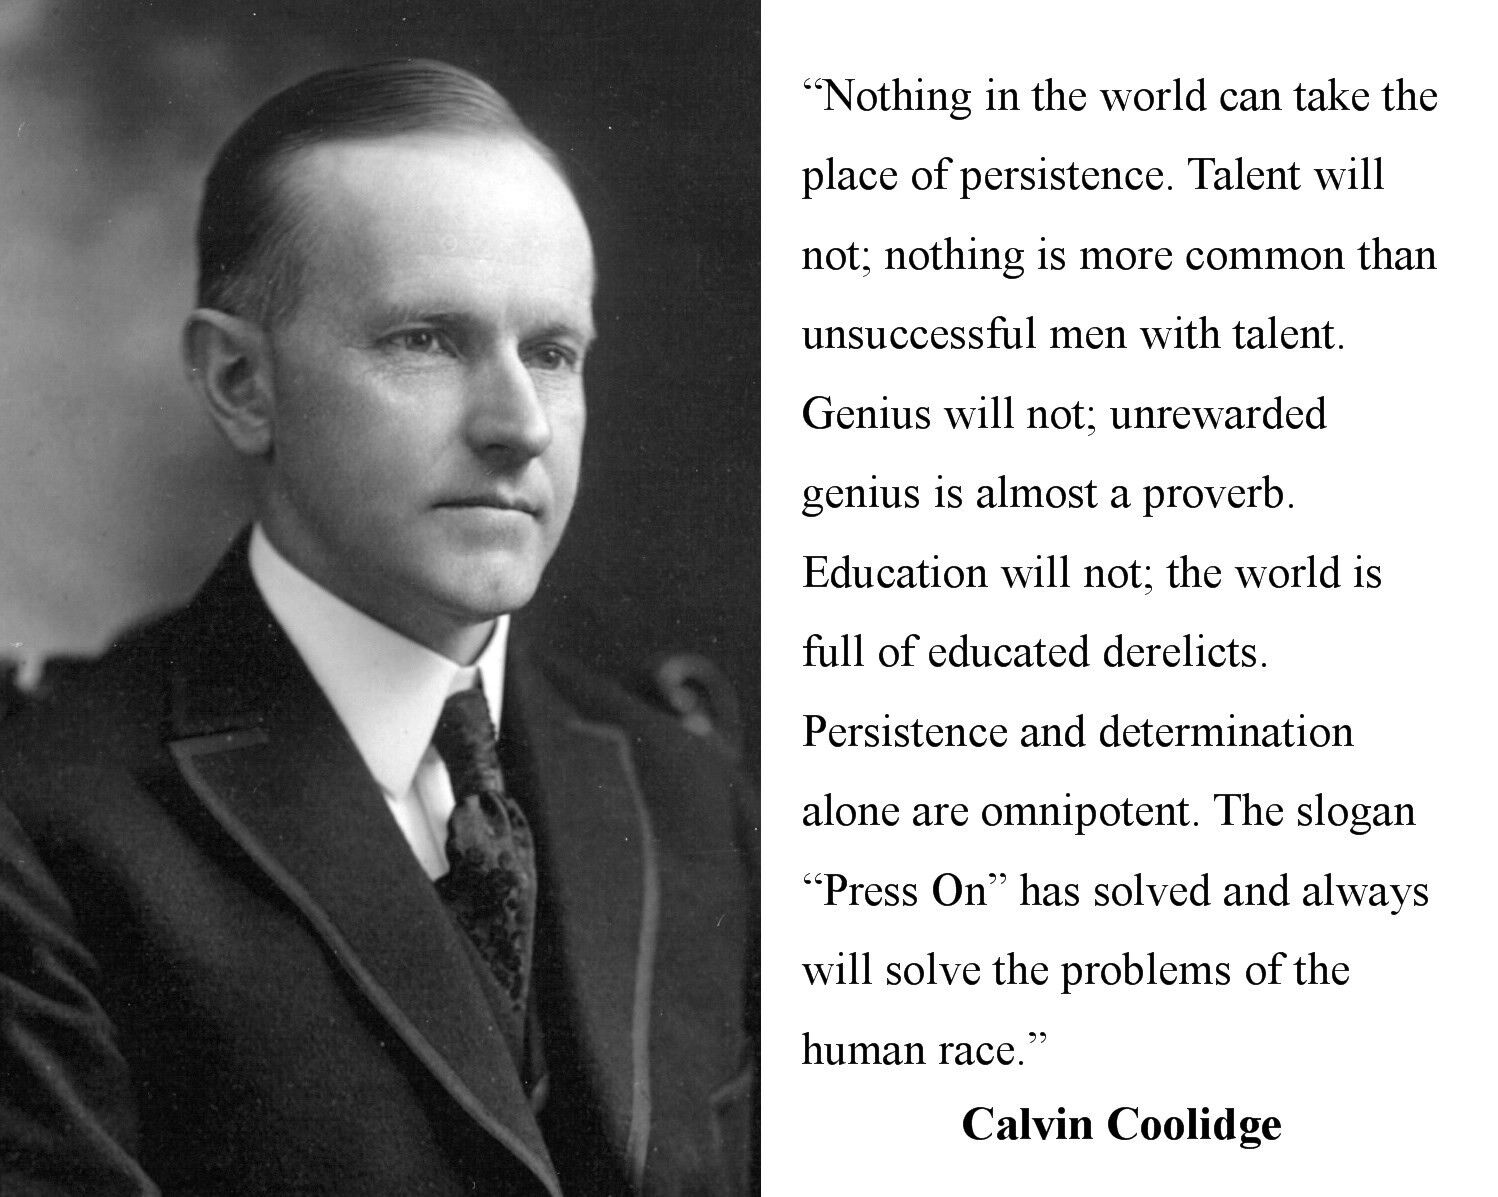 Calvin Coolidge President Motivational Quote 8 x 10 Photo Picture 